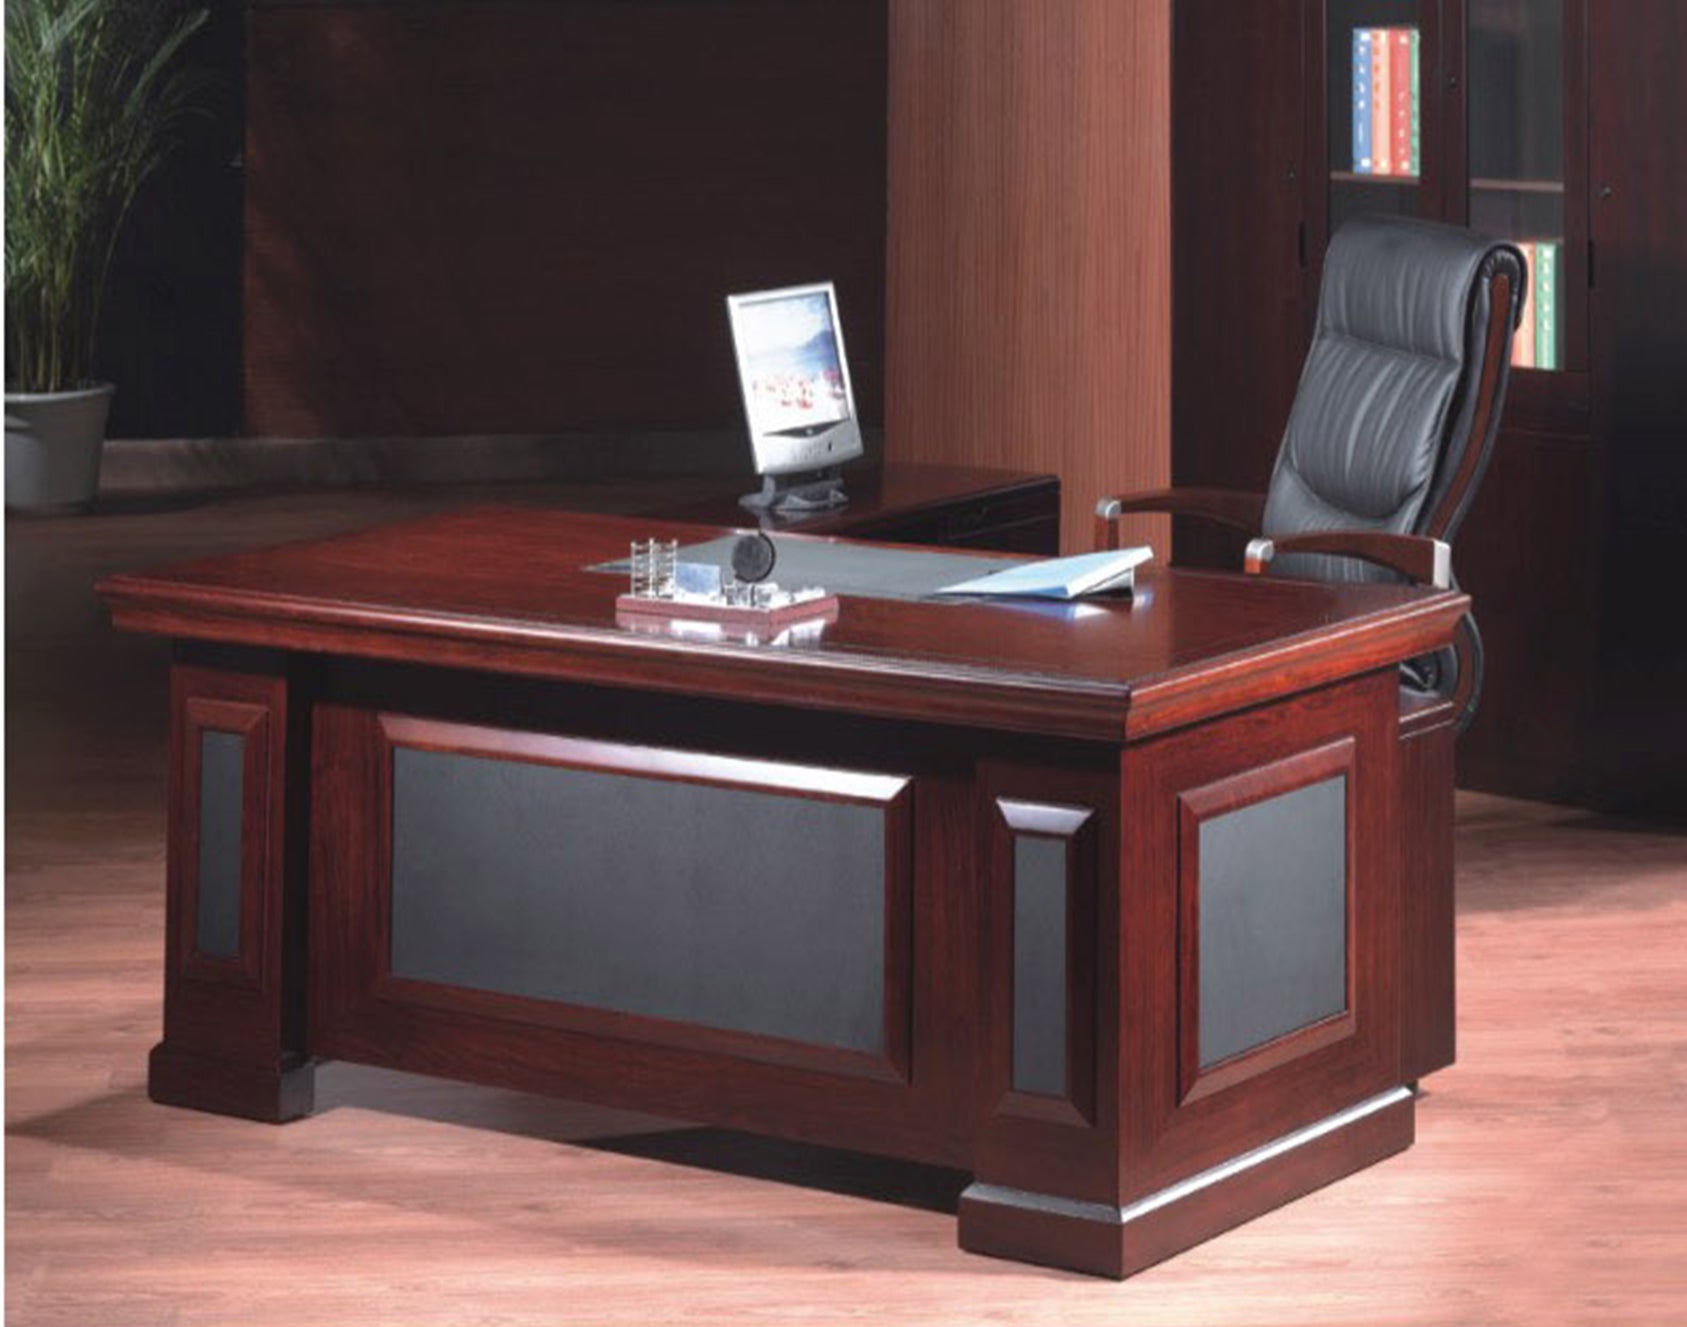 Mahogany Executive Desk With Leather Detailing - With Pedestal and Return - 1819 Huddersfield